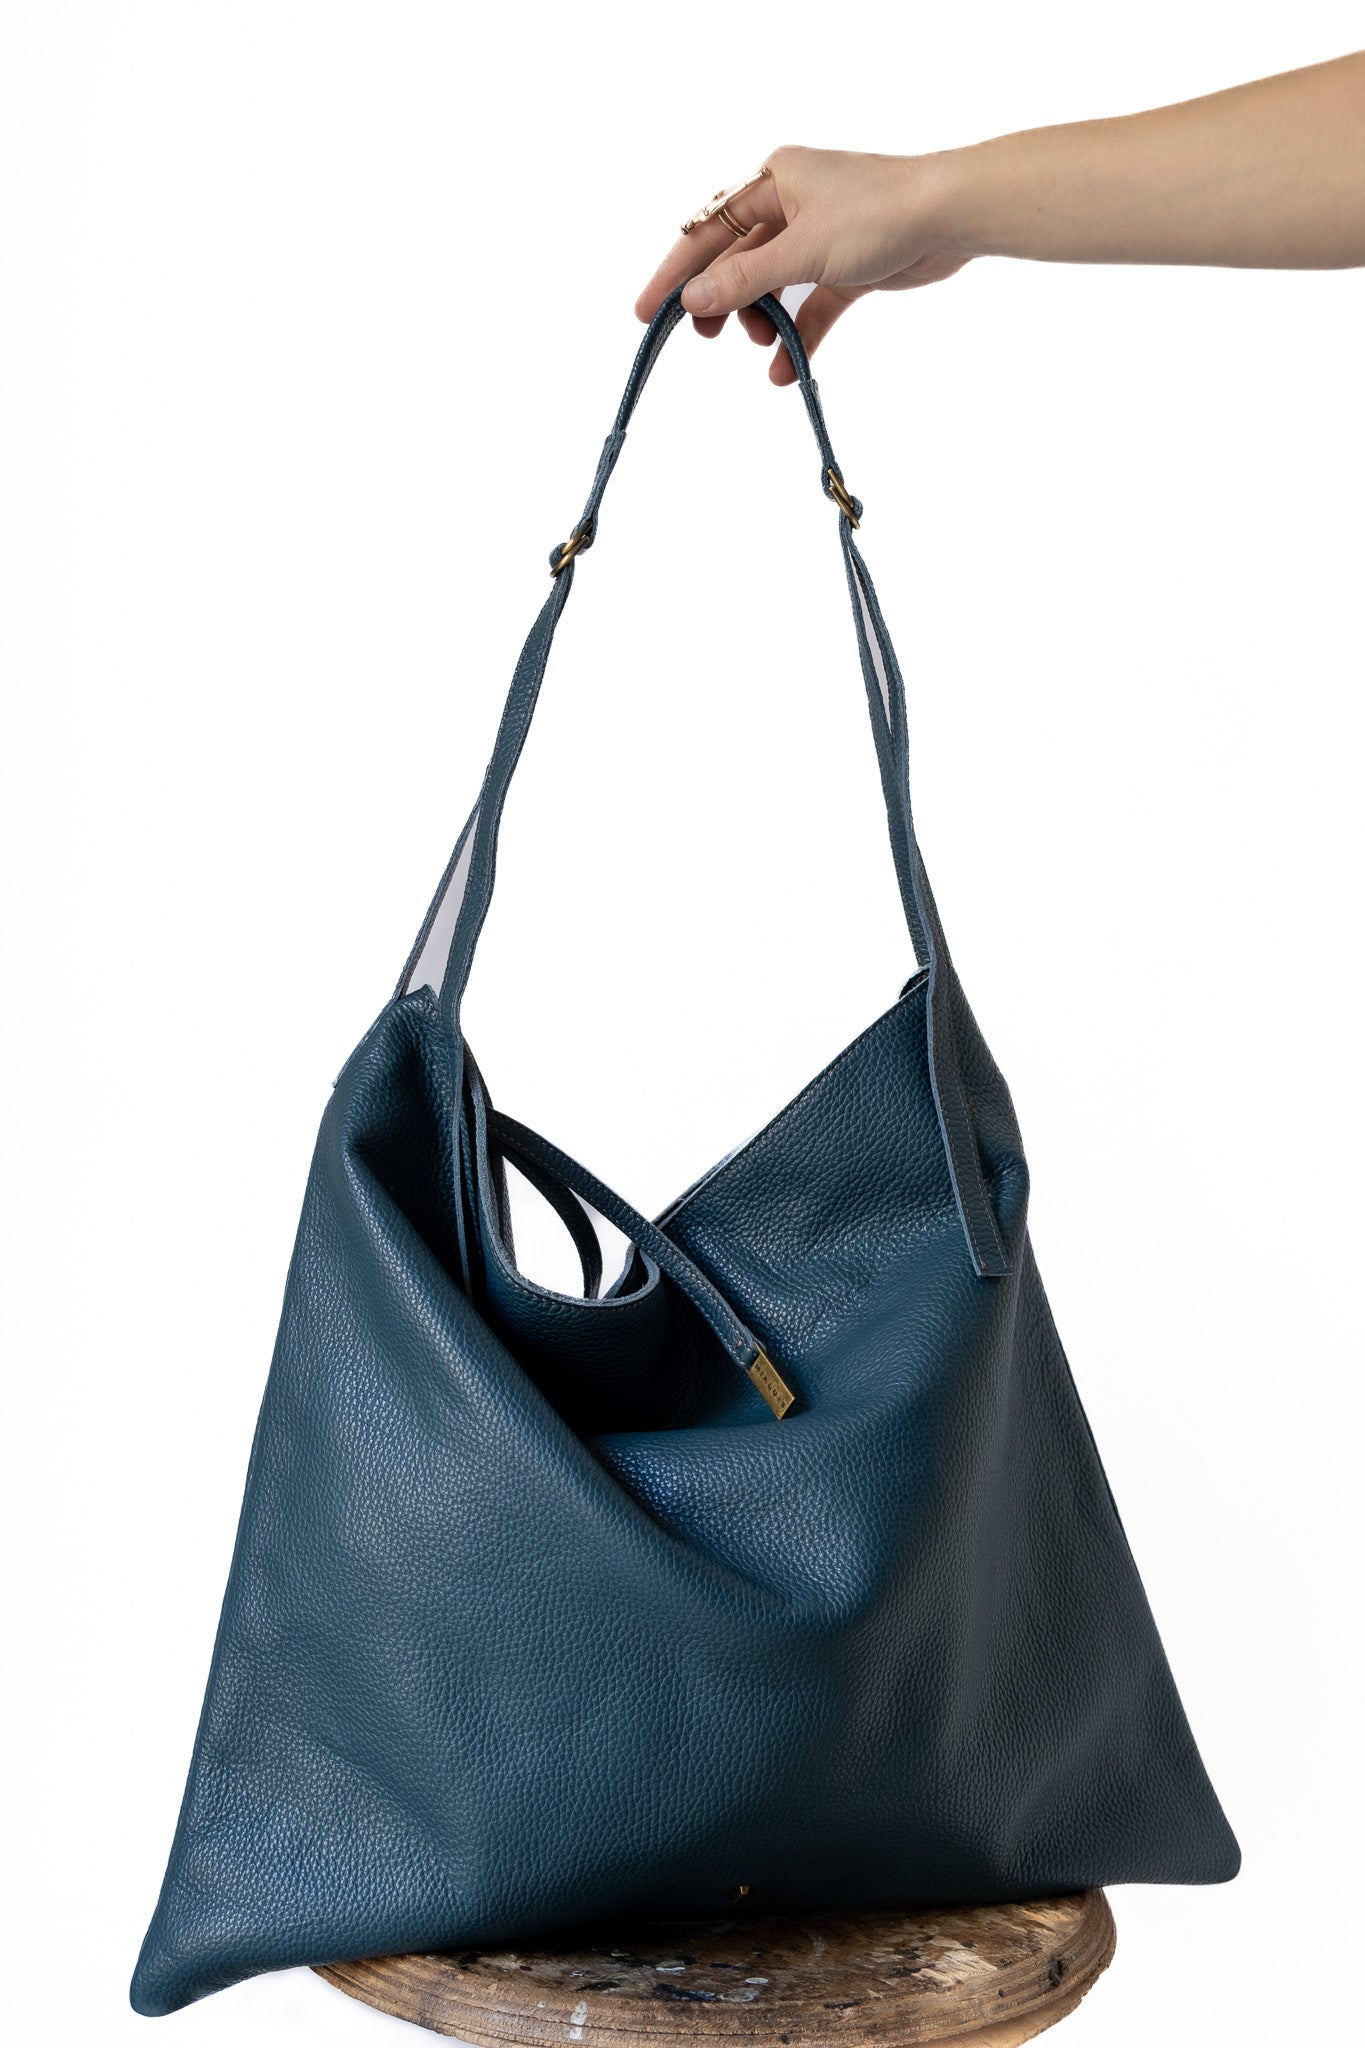 Valentina hobo bag in leather with natural grain